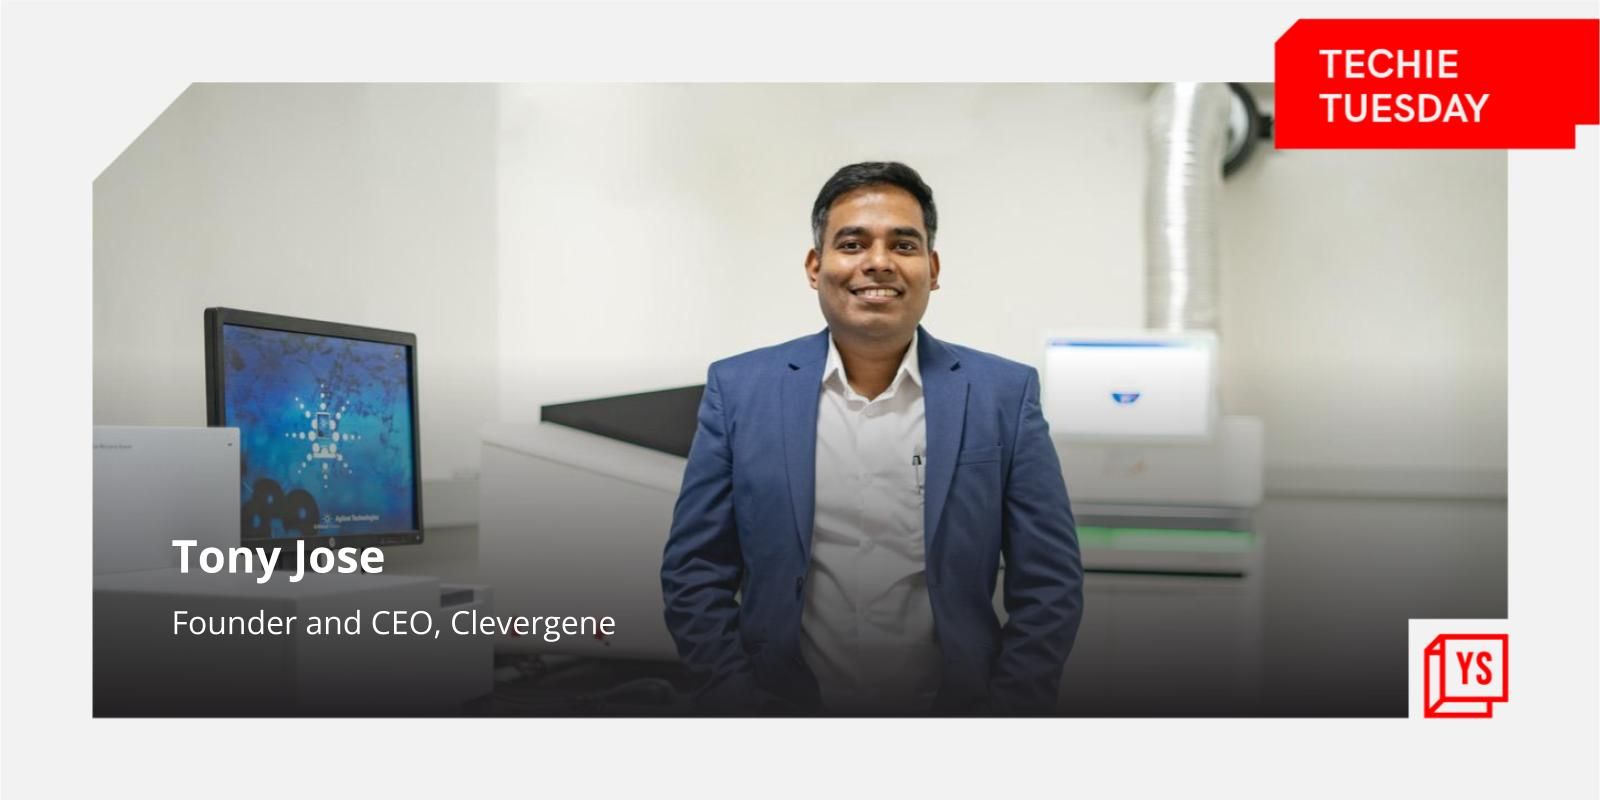 [Techie Tuesday] From a village in Kochi to building a genomics lab, here’s Tony Jose’s 15-year journey
